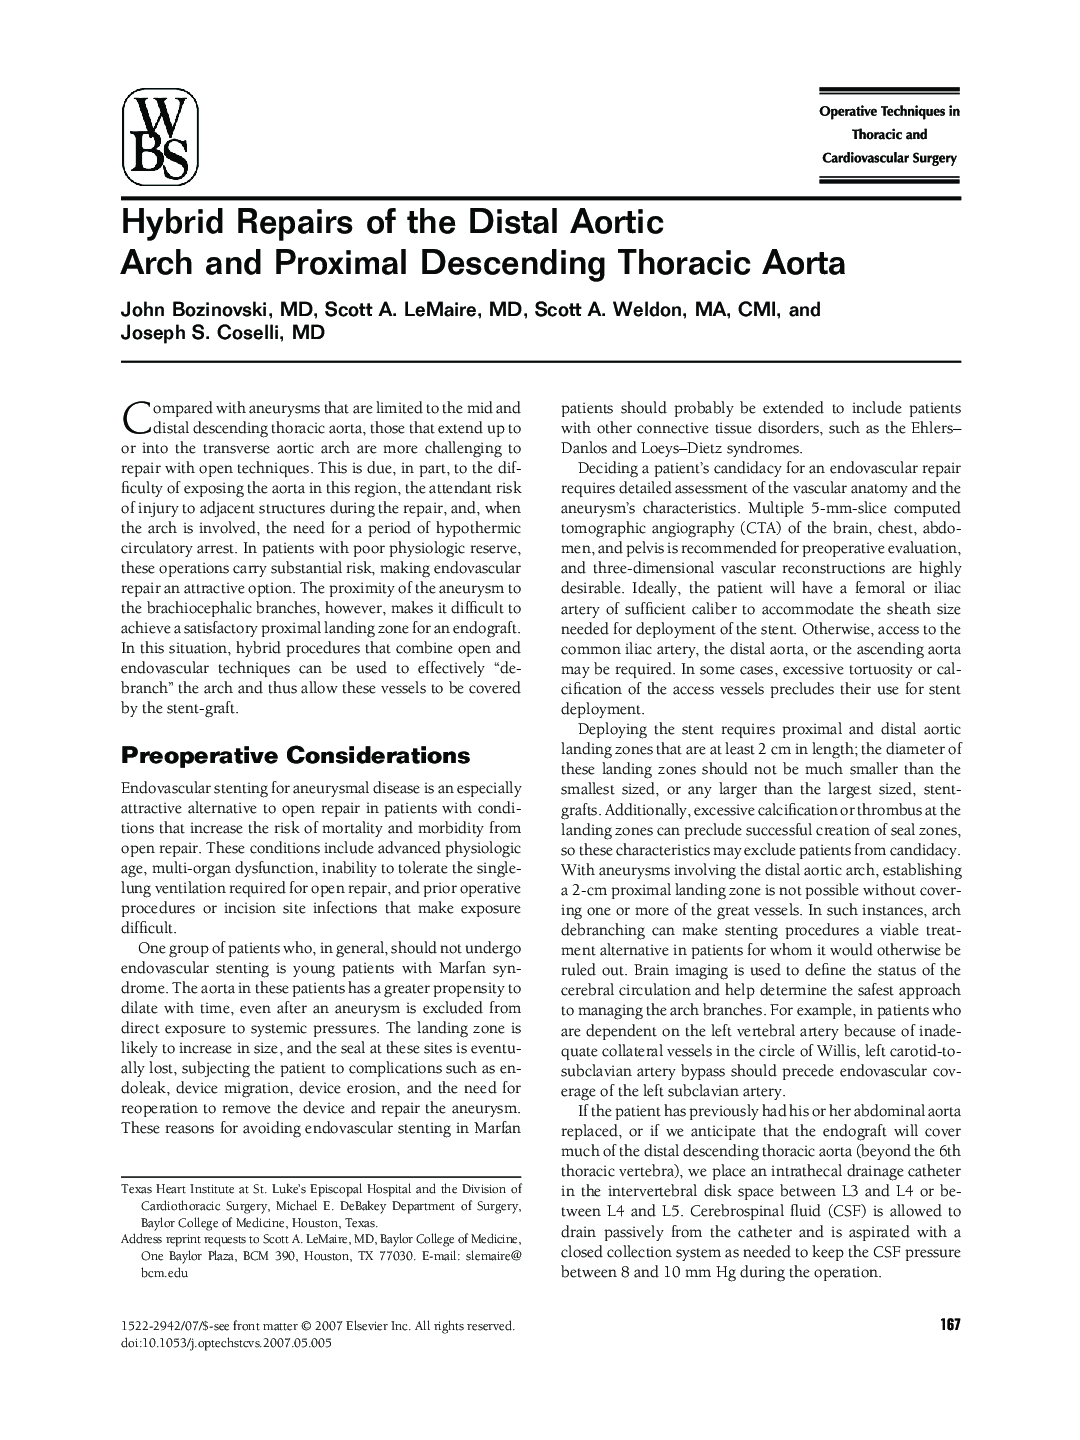 Hybrid Repairs of the Distal Aortic Arch and Proximal Descending Thoracic Aorta